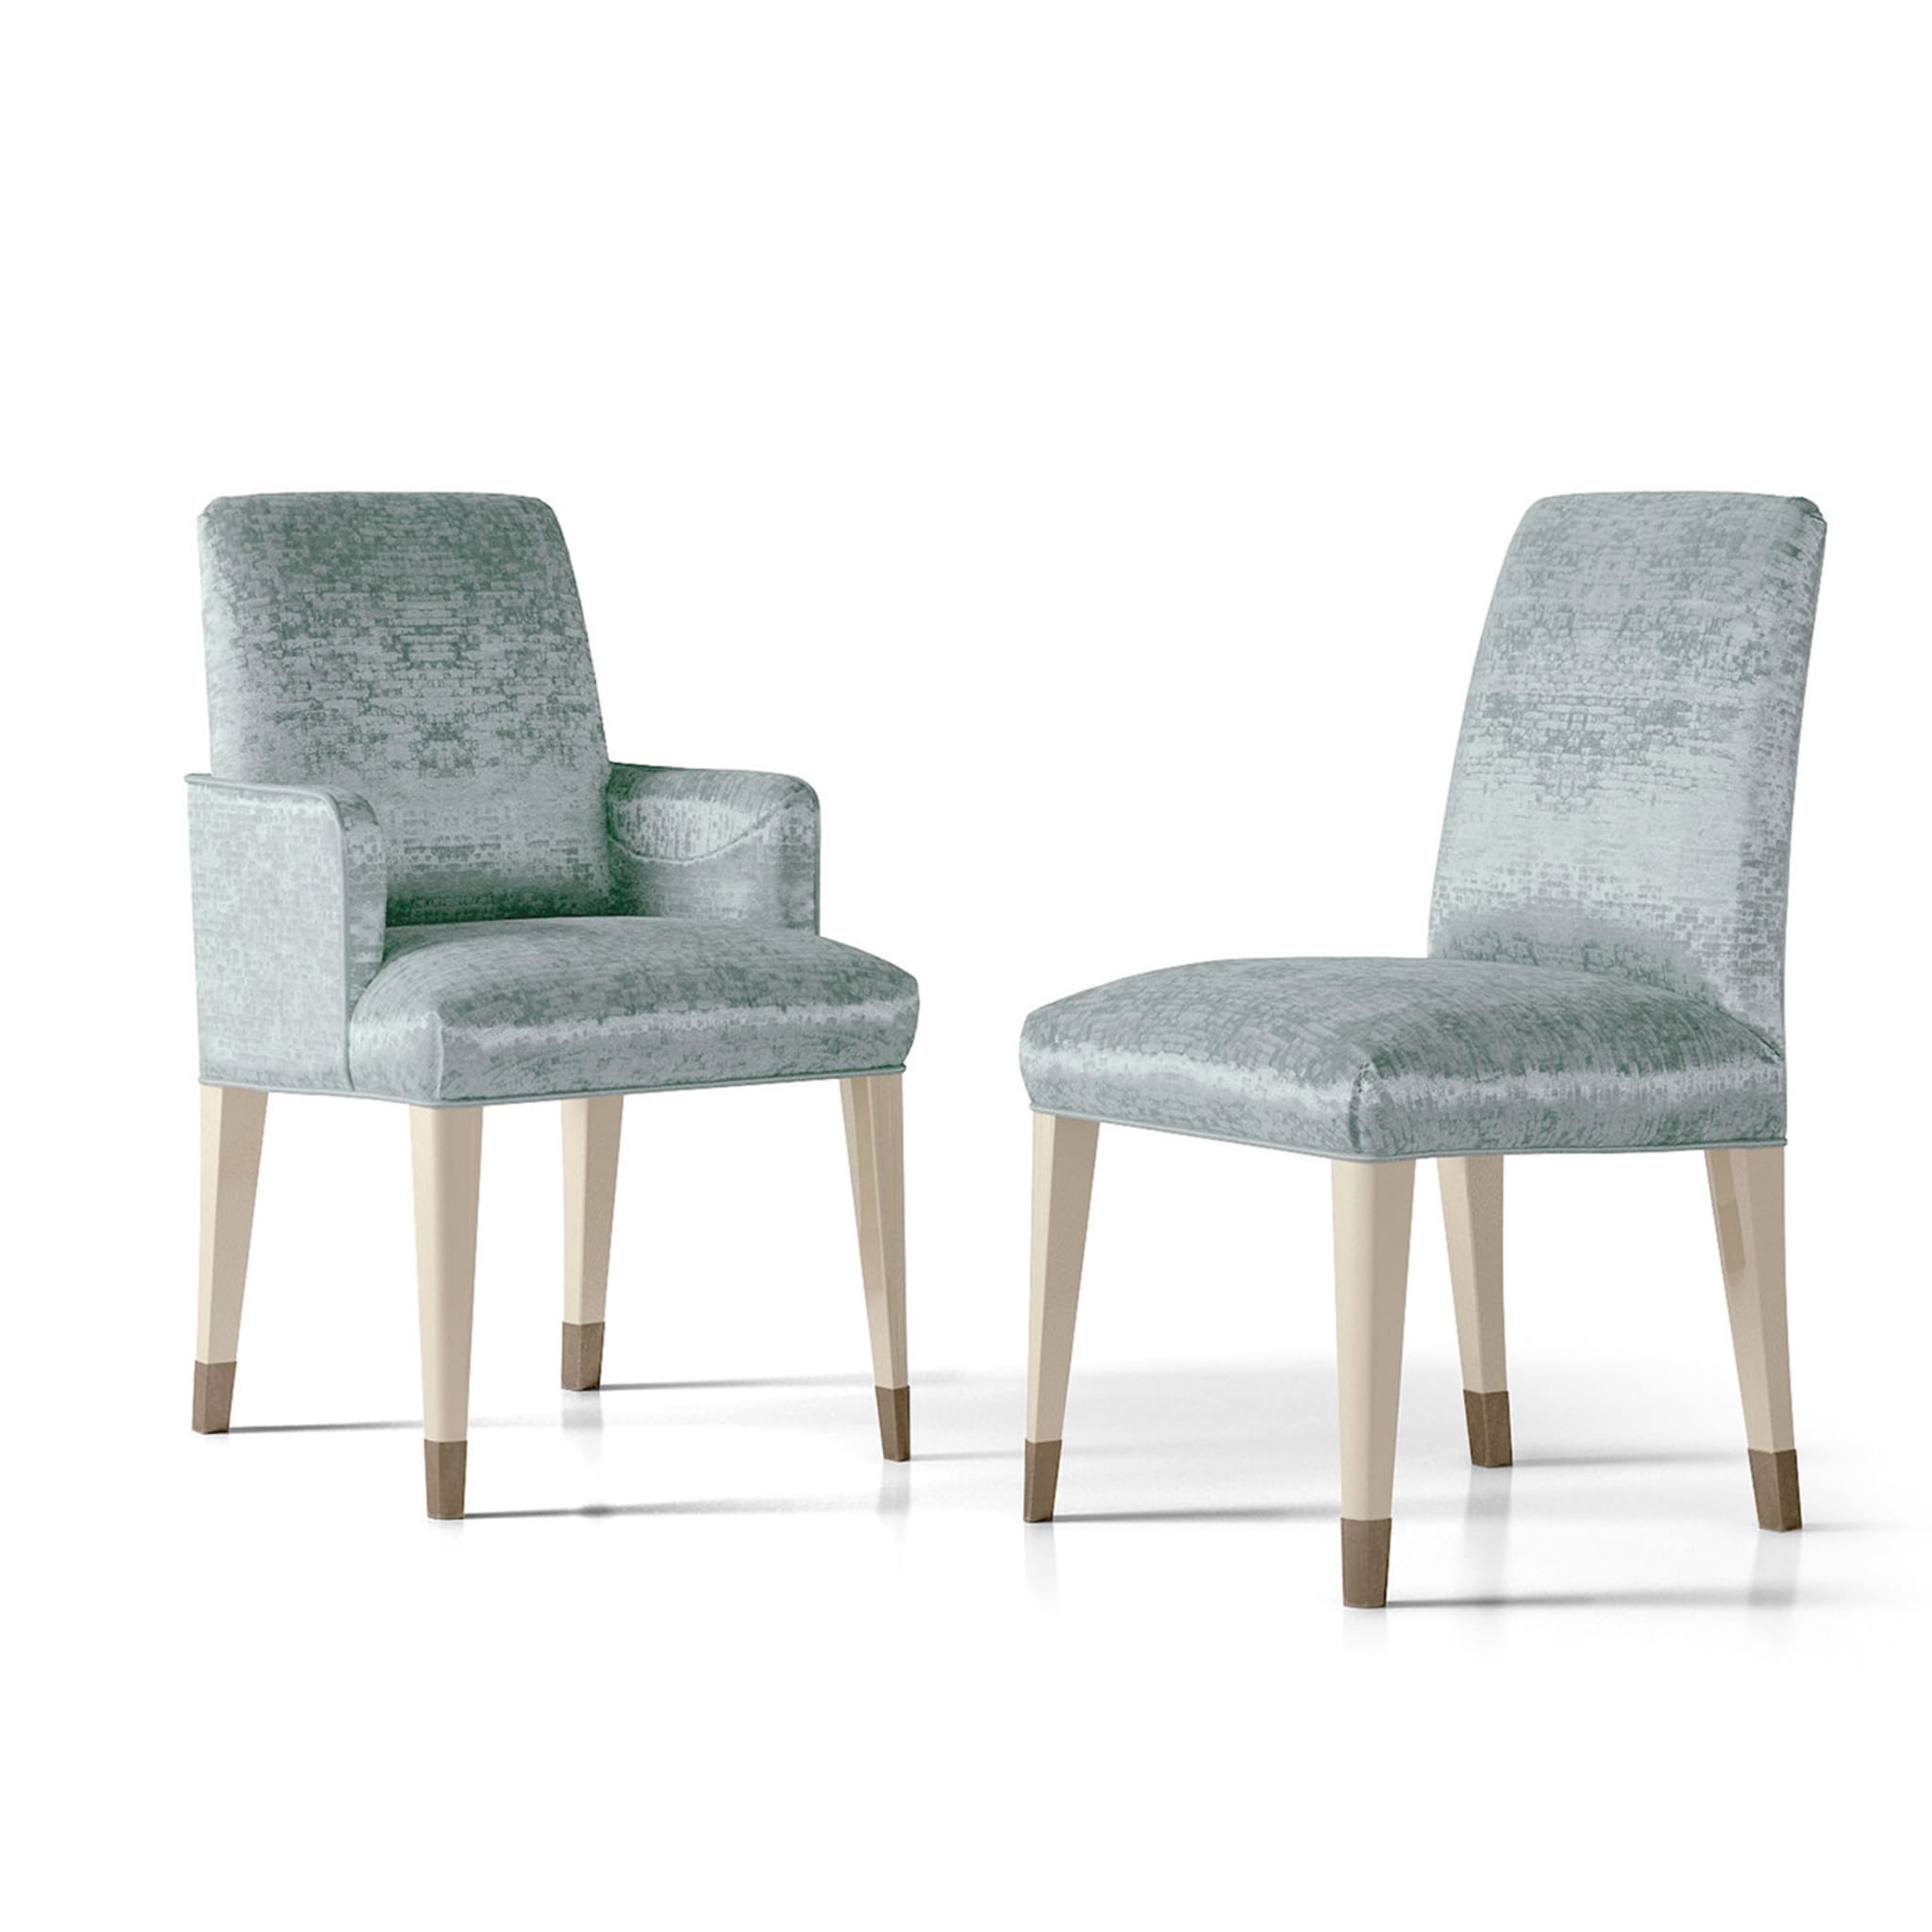 Holly Light Blue Dining chair #2 - Alternative view 1